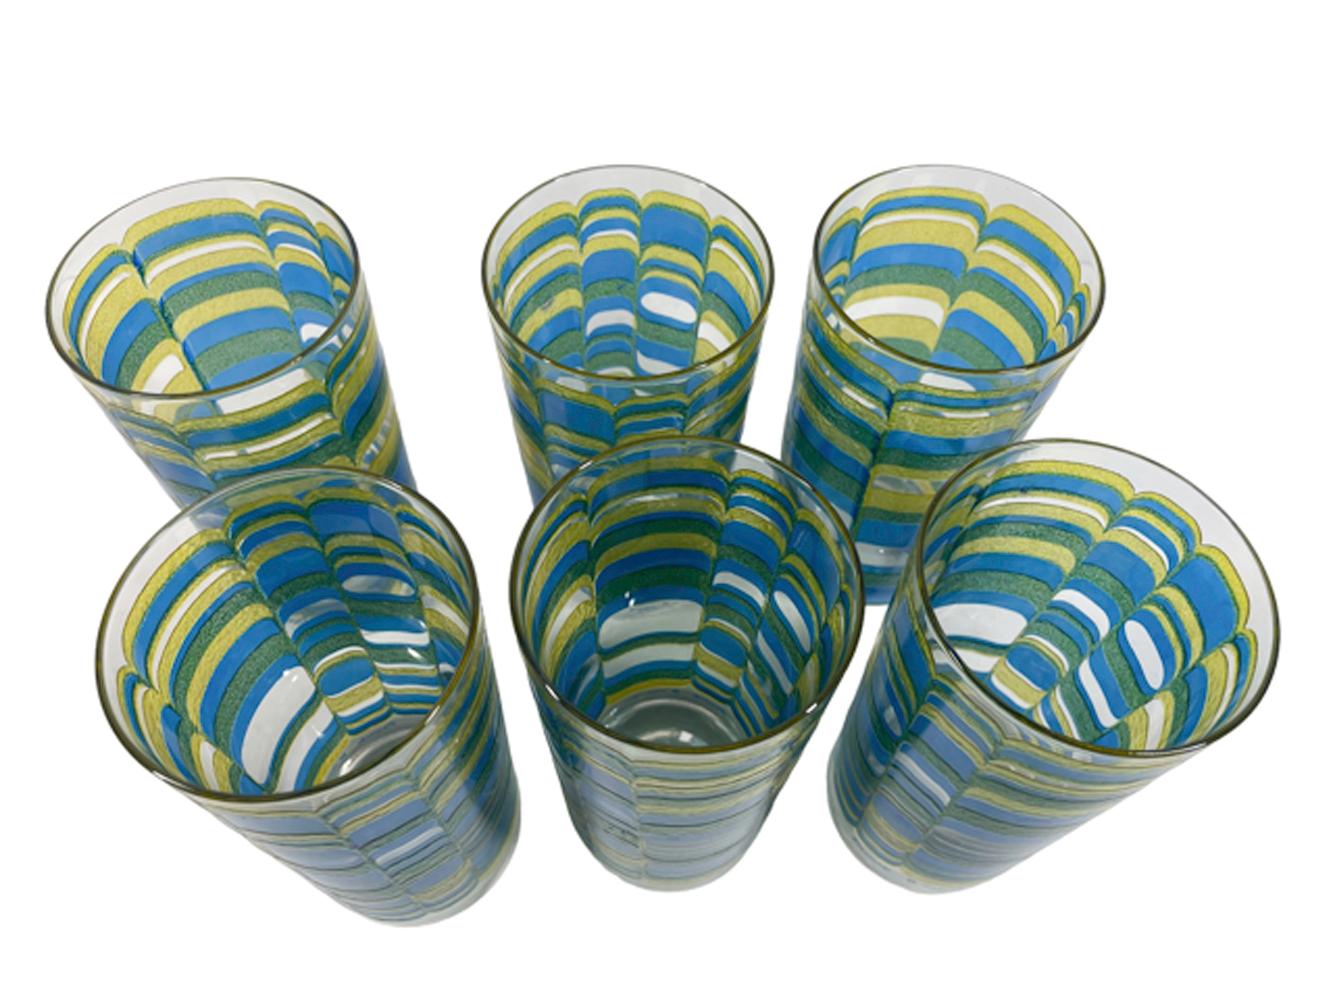 Six Mid-Century highball glasses in a yellow, blue and green raised, textured geometric design with a non-slip surface, designed by Irene Pasinski for the Washington Glass Company.